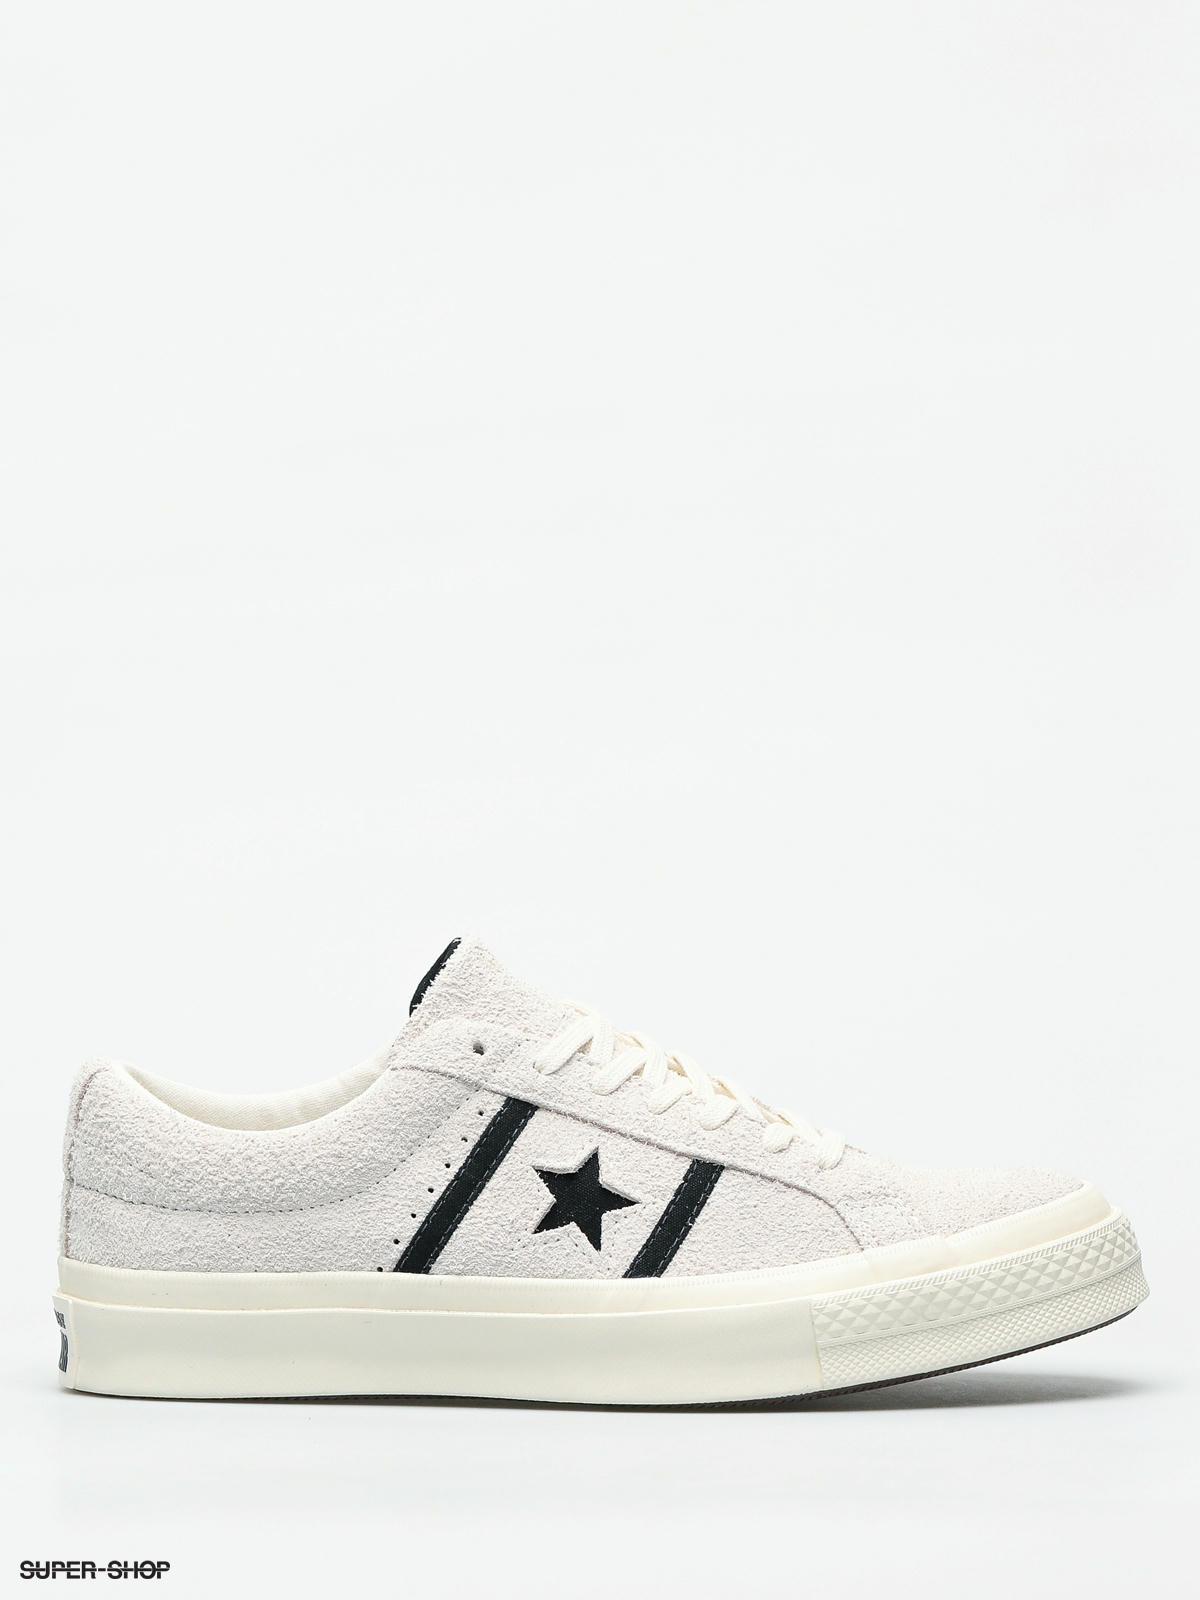 converse one star dx